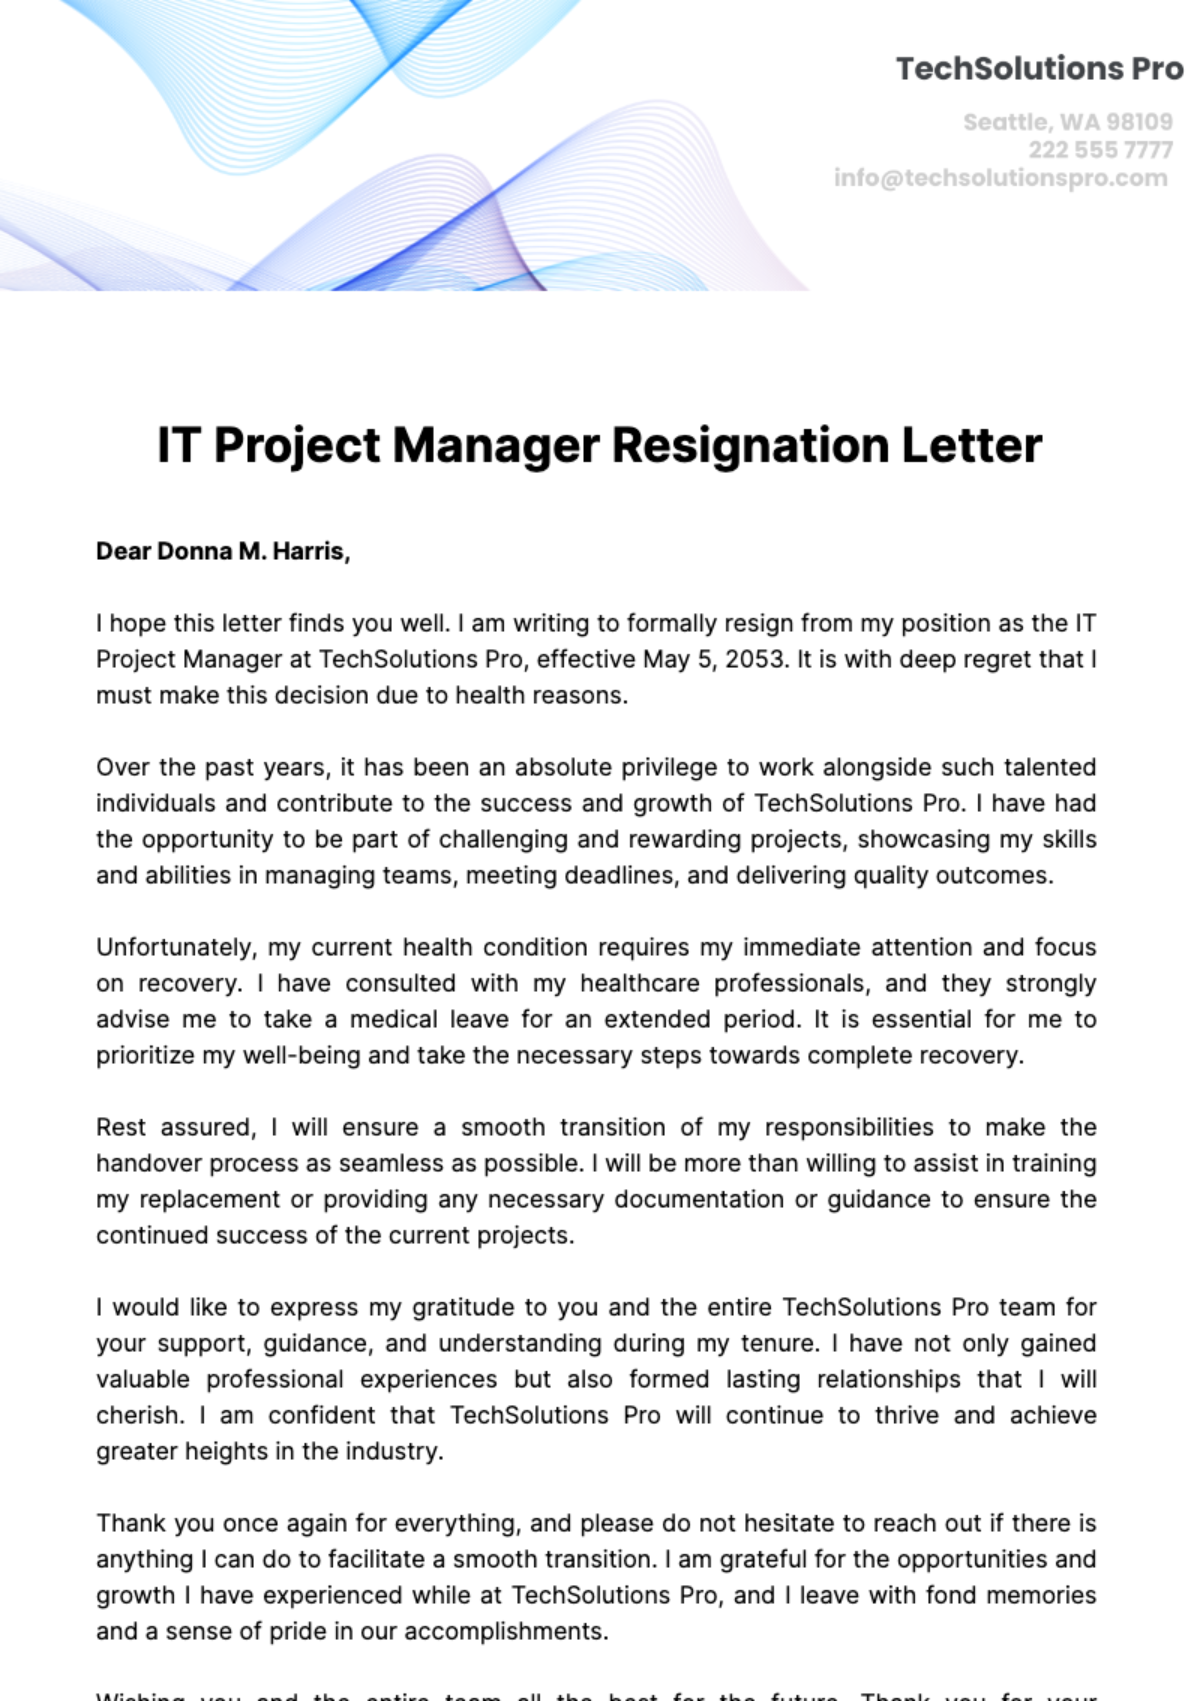 Free IT Project Manager Resignation Letter  Template